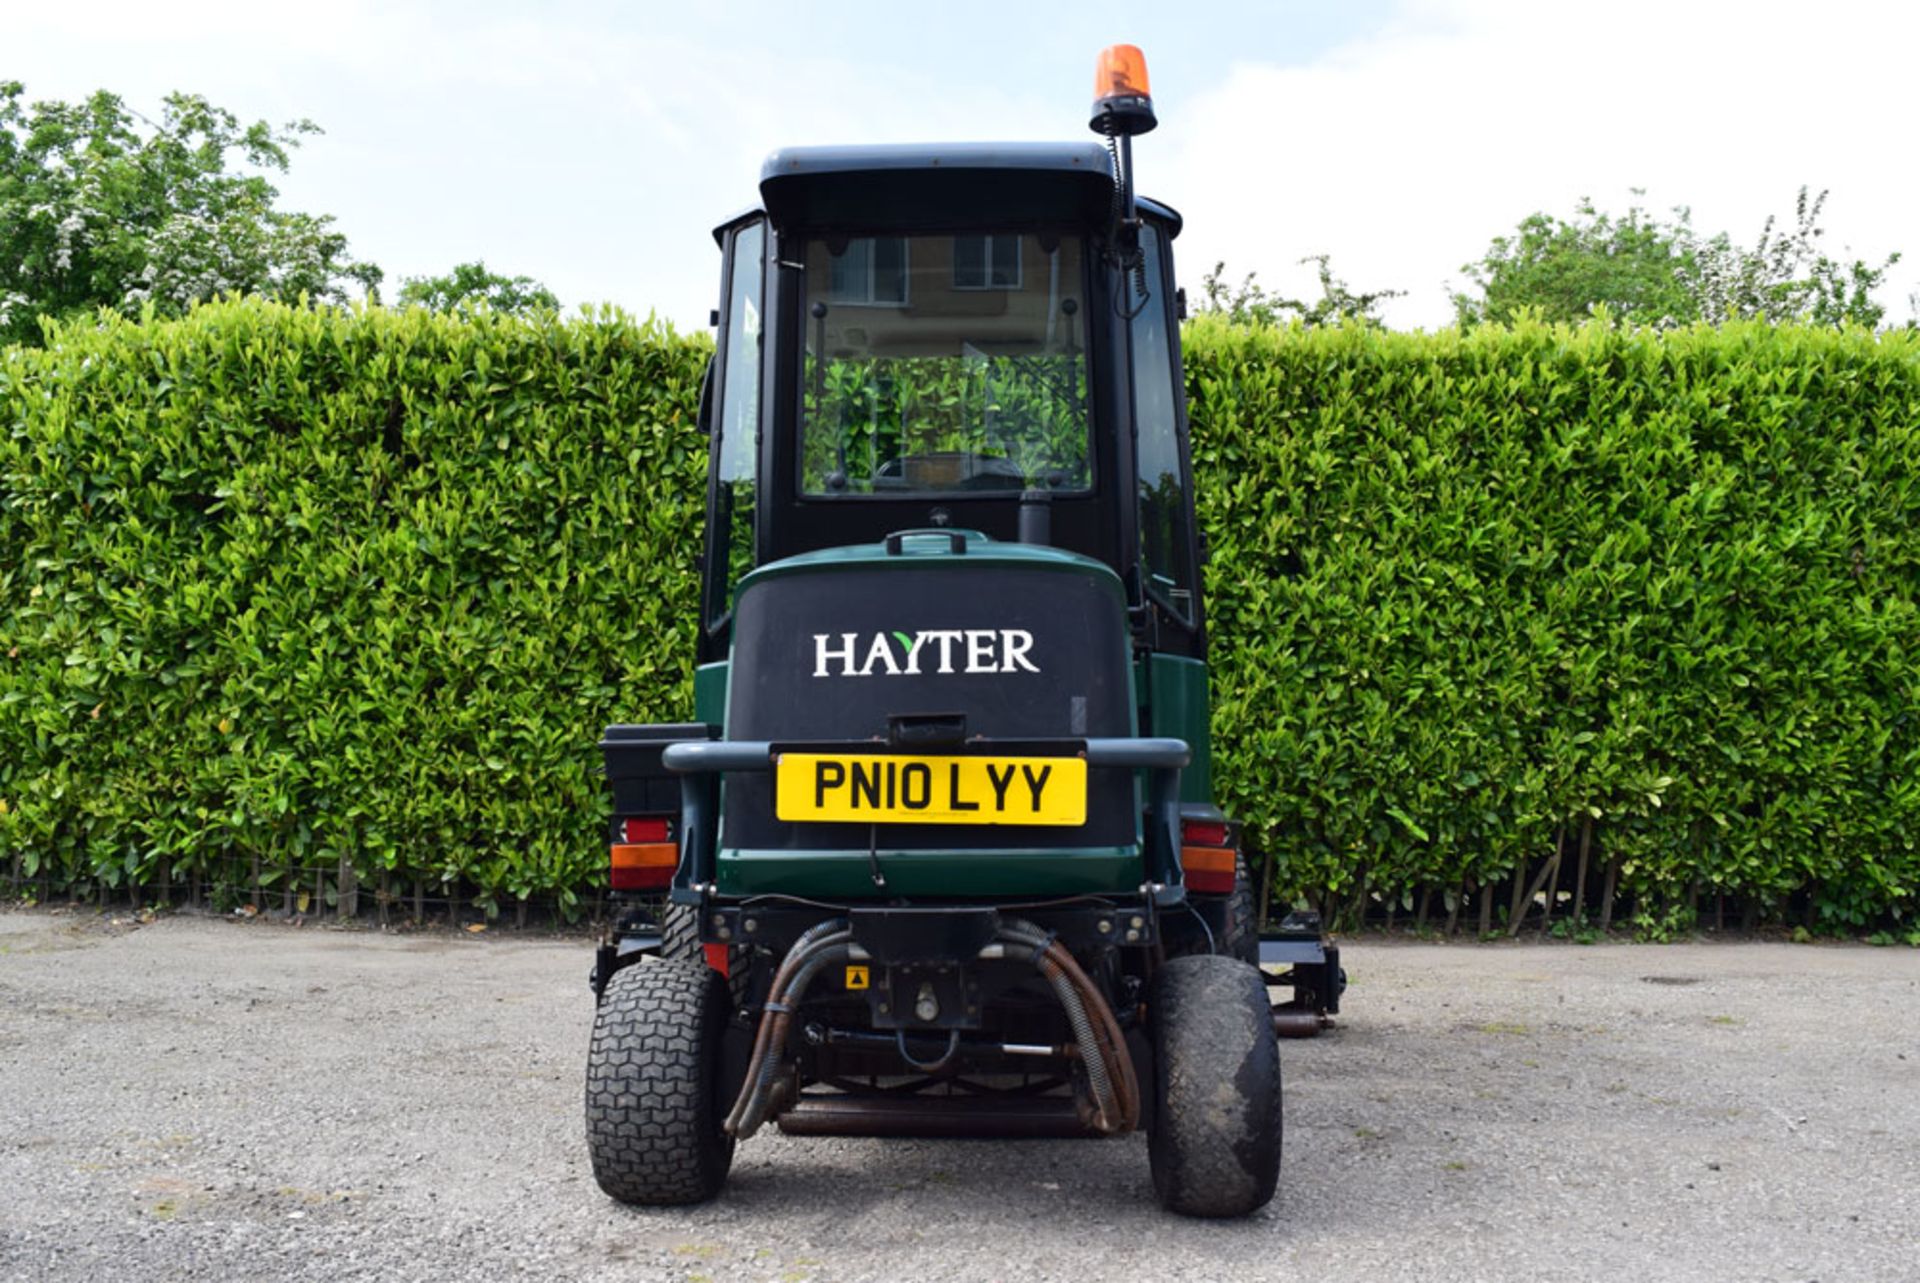 2010 Hayter LT324 Triple Cylinder Mower With Cab - Image 5 of 7